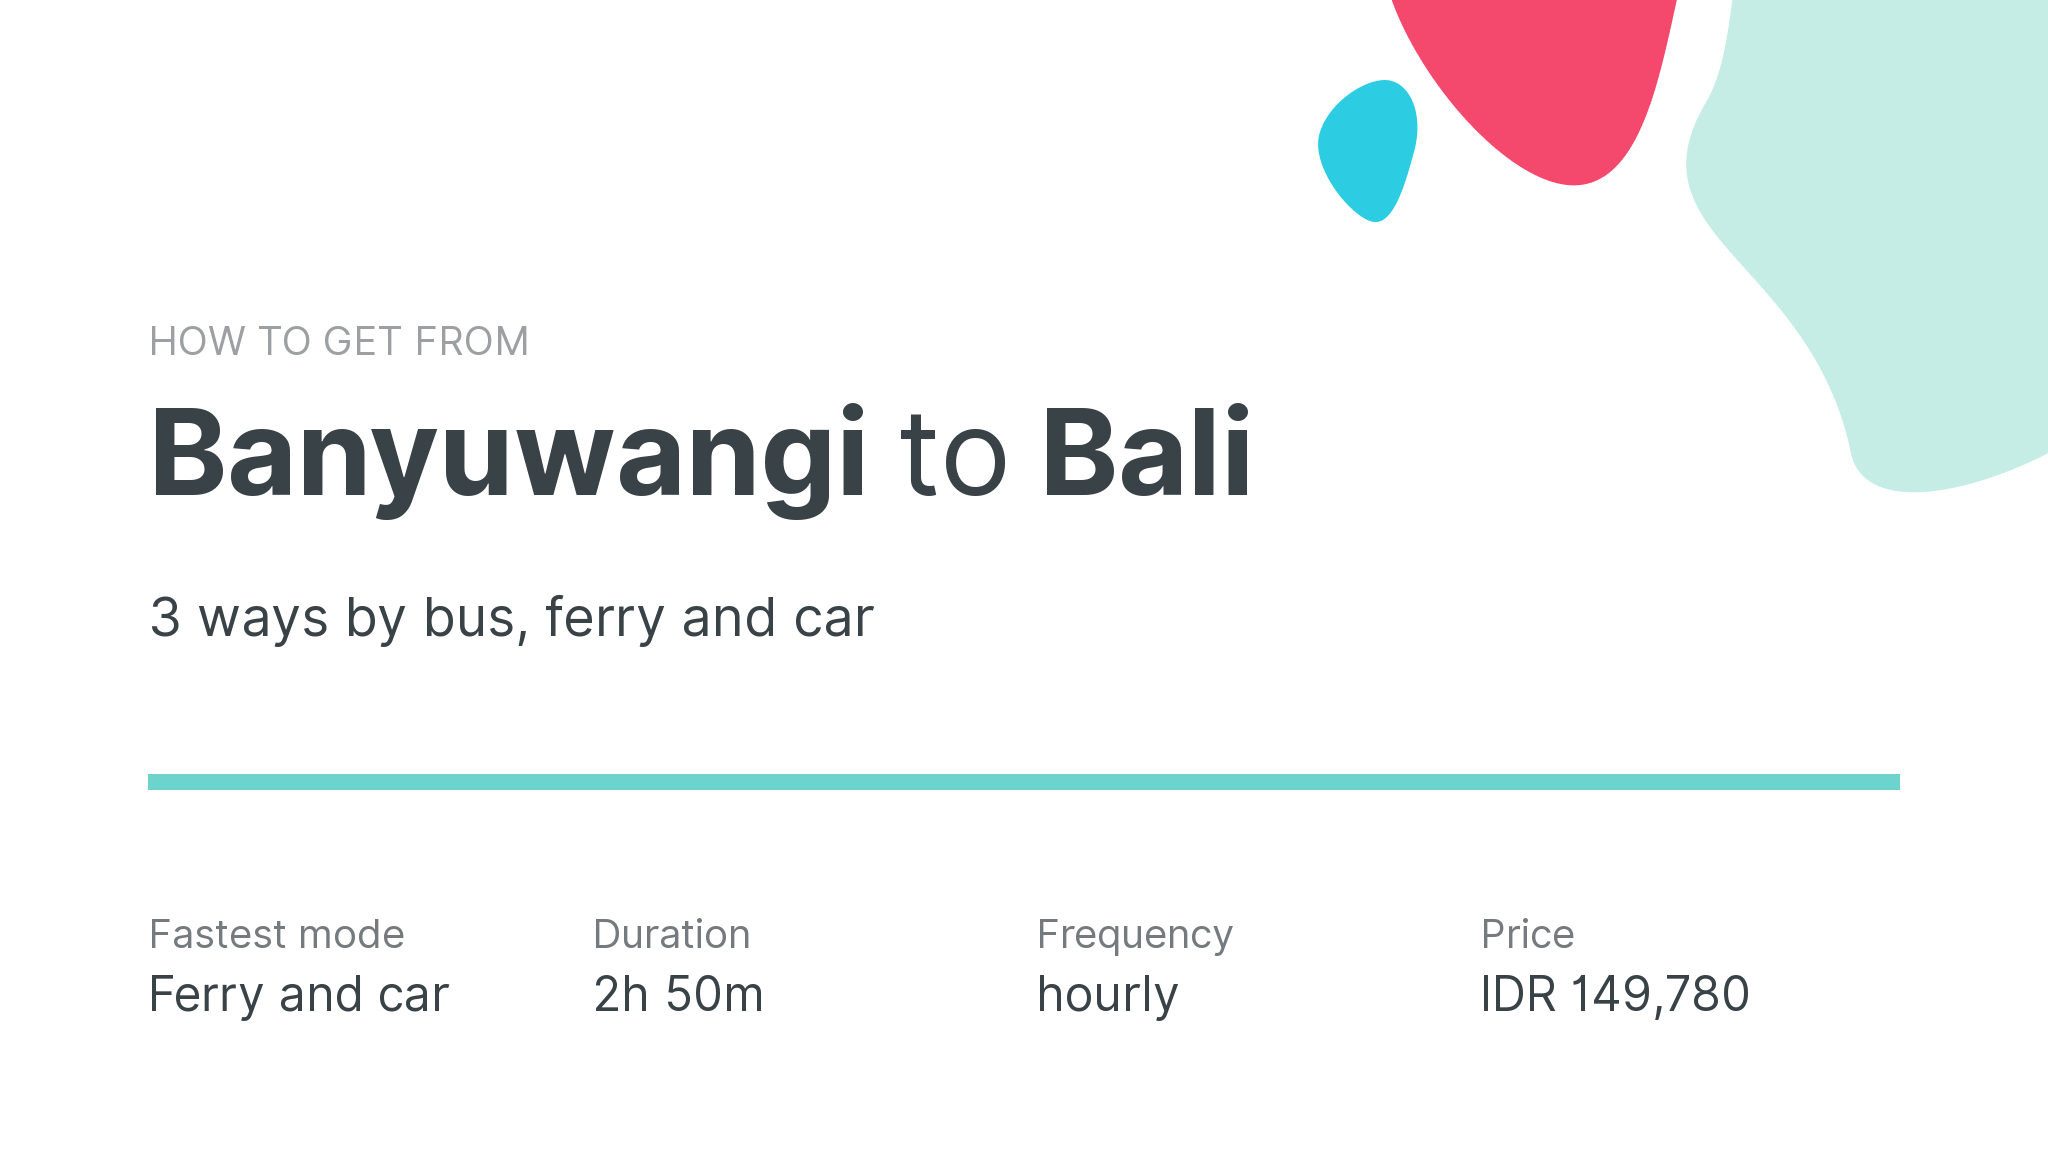 How do I get from Banyuwangi to Bali